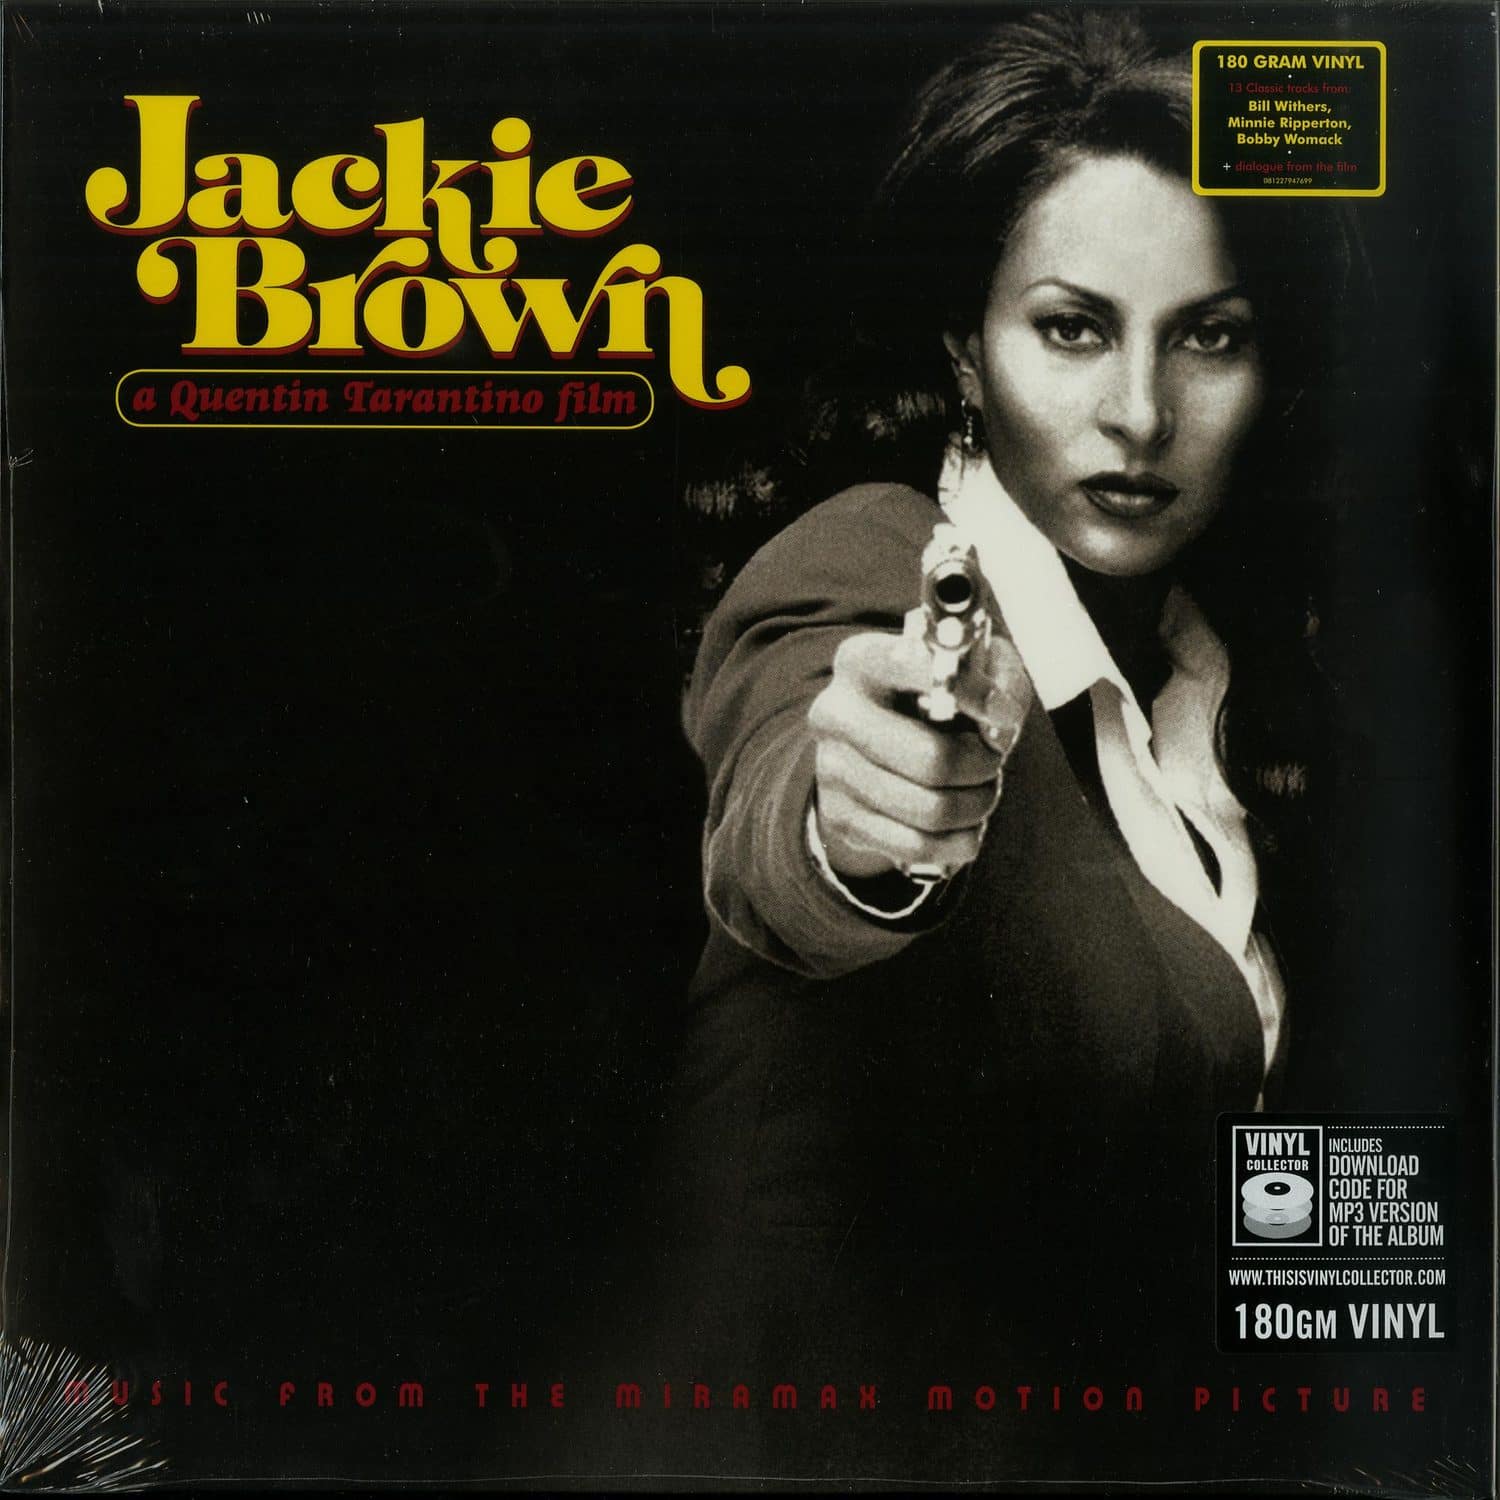 Various Artists - JACKIE BROWN O.S.T. 